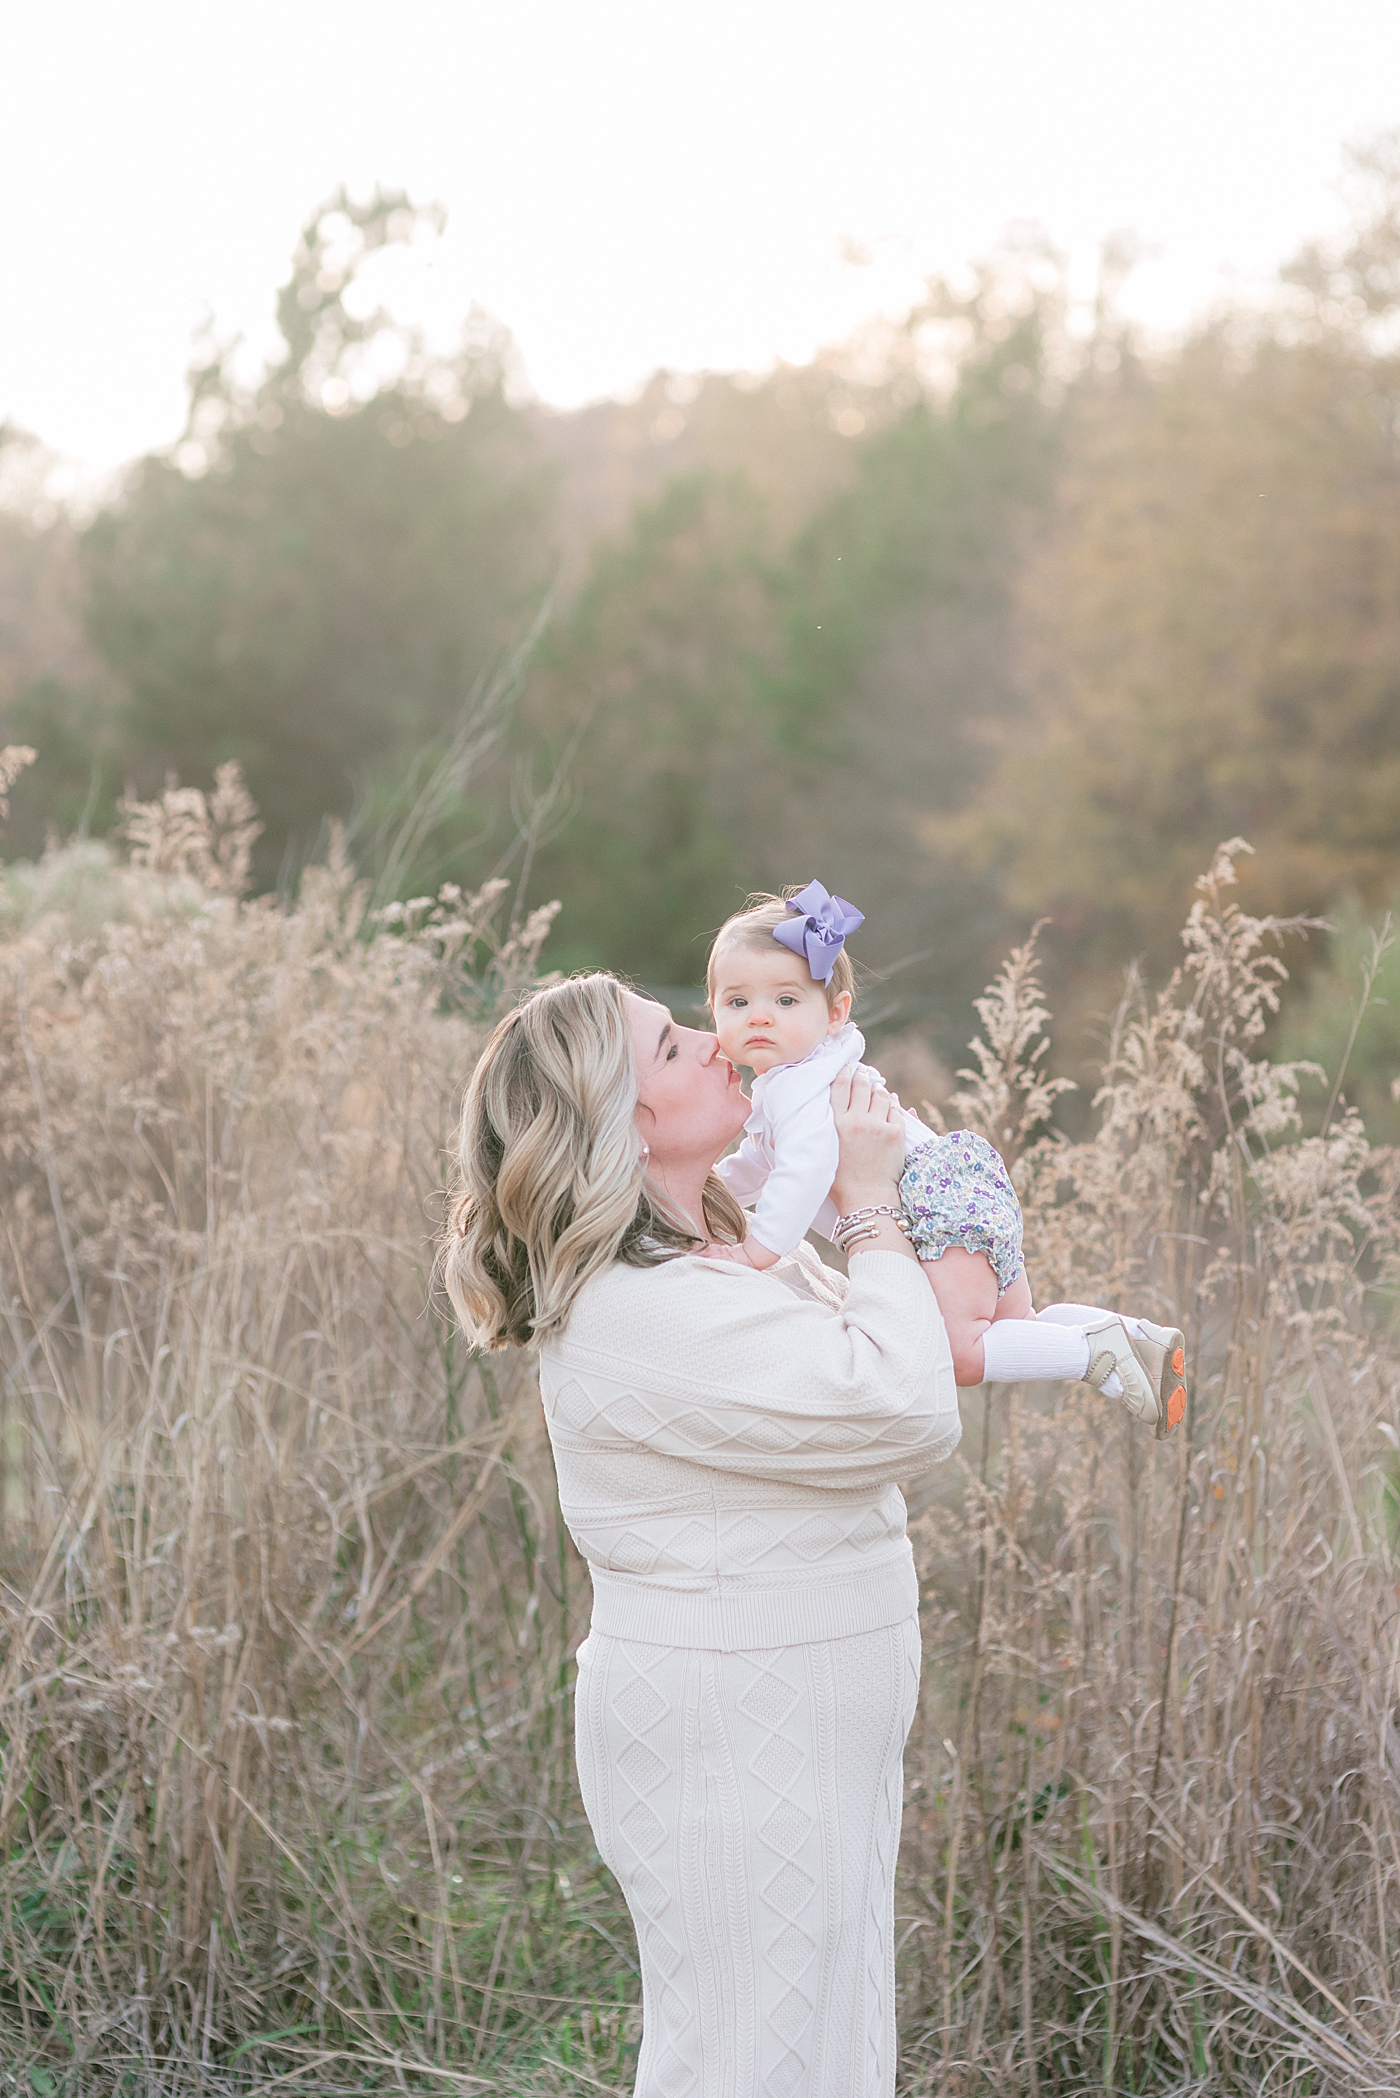 Mom kissing baby girl with purple bow during her Milestone Session at Marvin Efird Park | Photo by Anna Wisjo Photography 